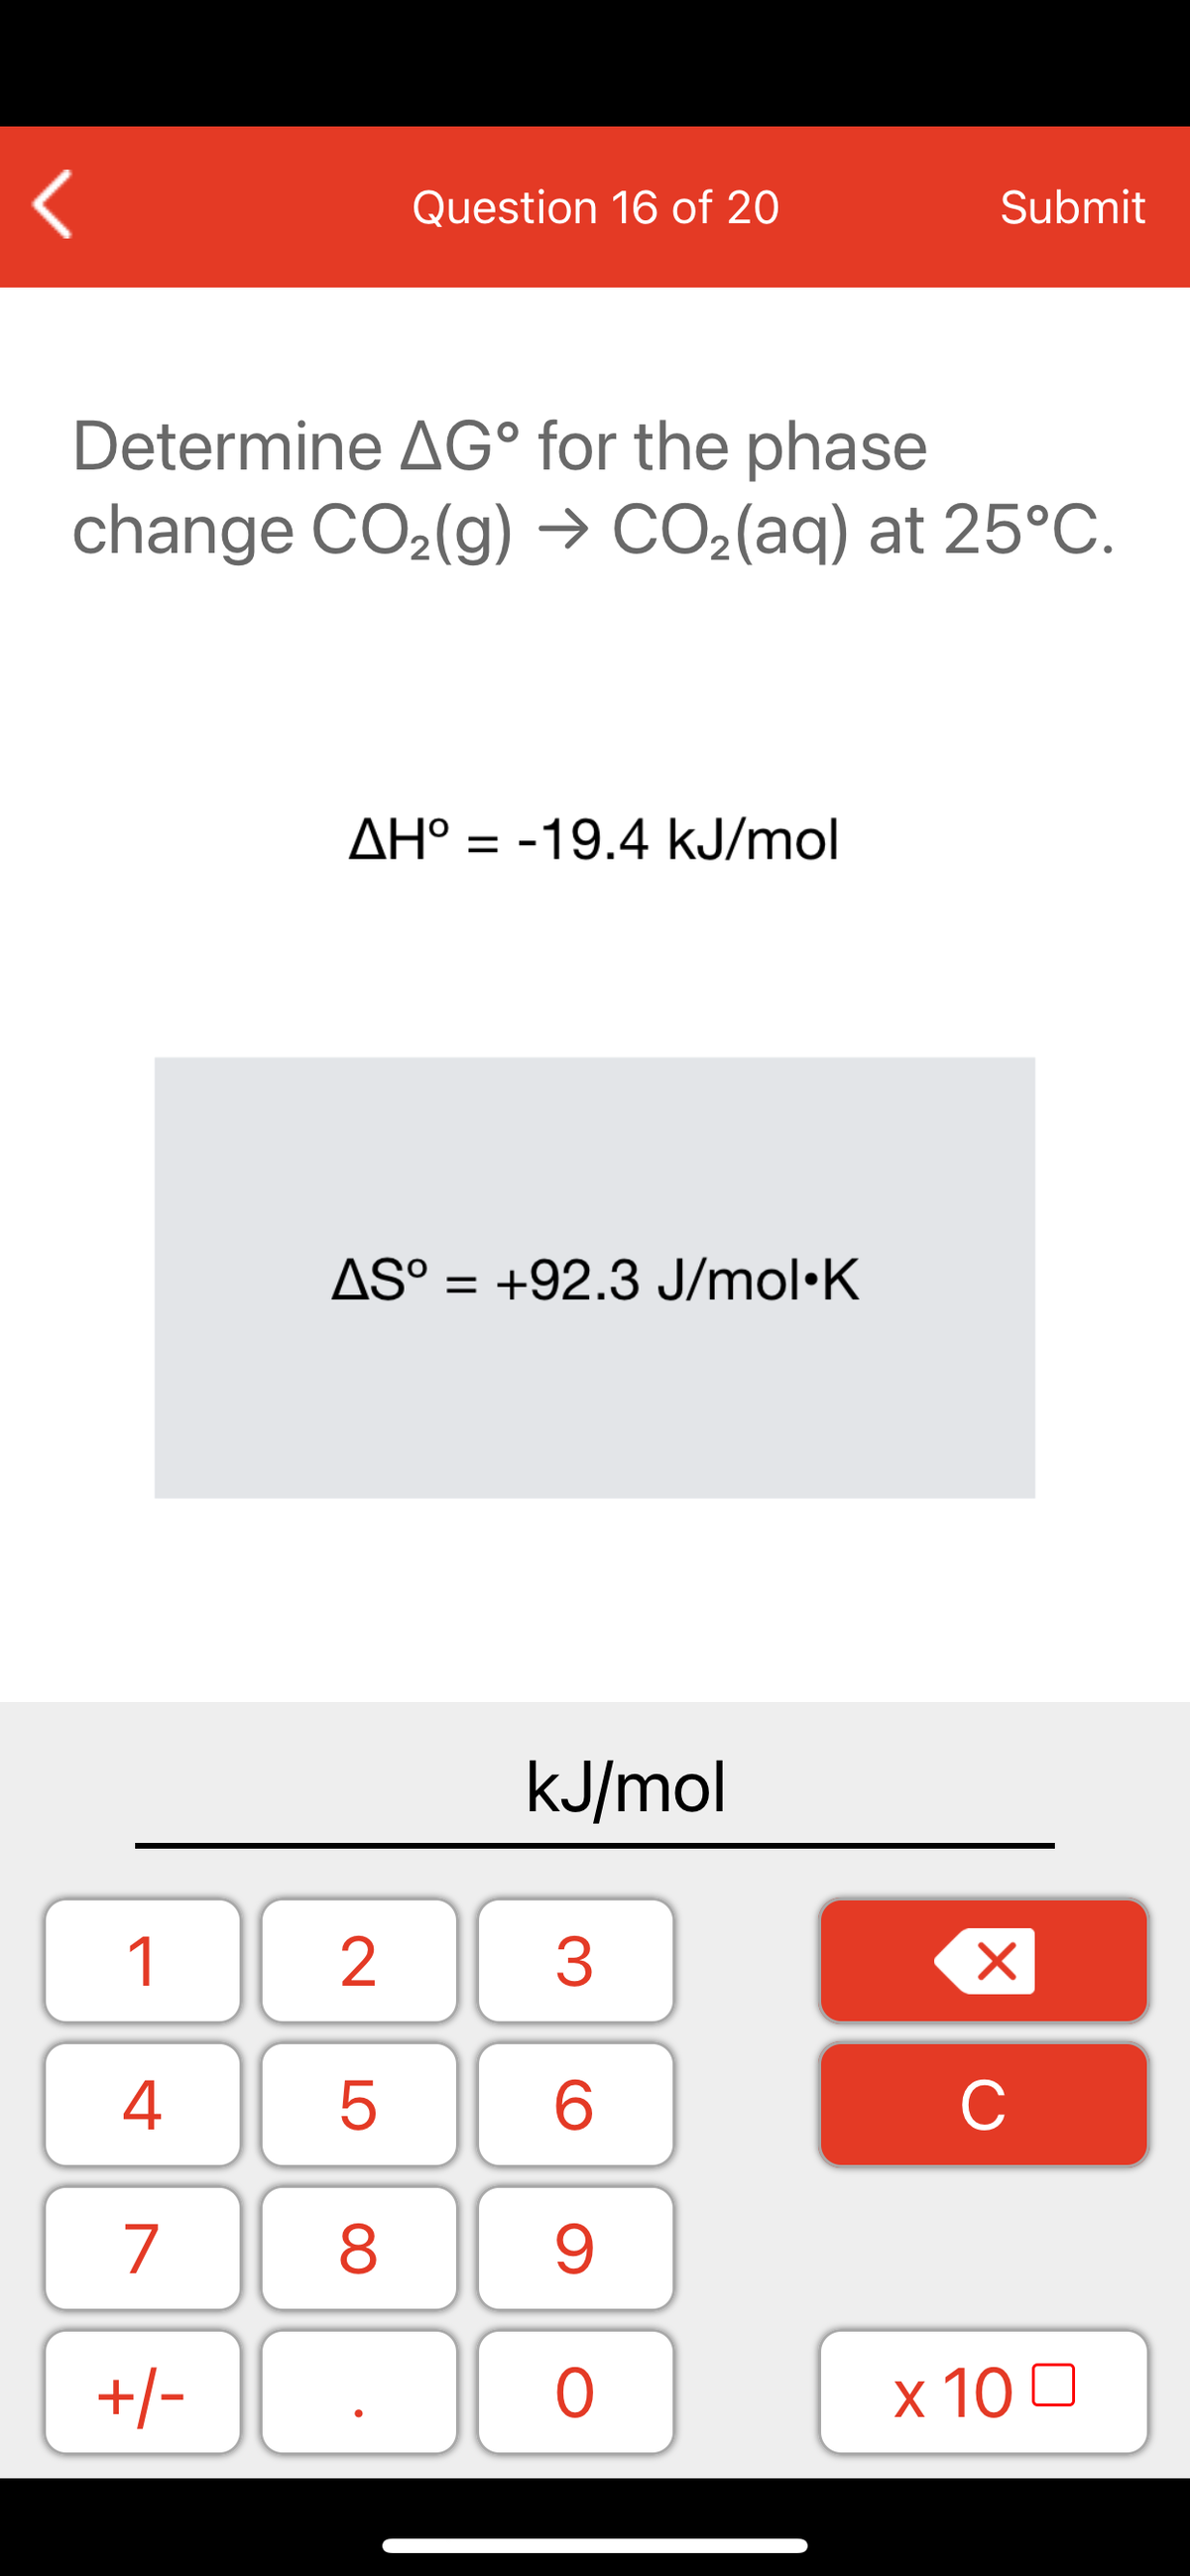 Question 16 of 20
Submit
Determine AG° for the phase
change CO2(g) → CO2(aq) at 25°C.
AH° = -19.4 kJ/mol
ΔΗ
AS° = +92.3 J/mol·K
%3D
kJ/mol
1
2
3
C
7
9.
+/-
x 10 0
LO
00
